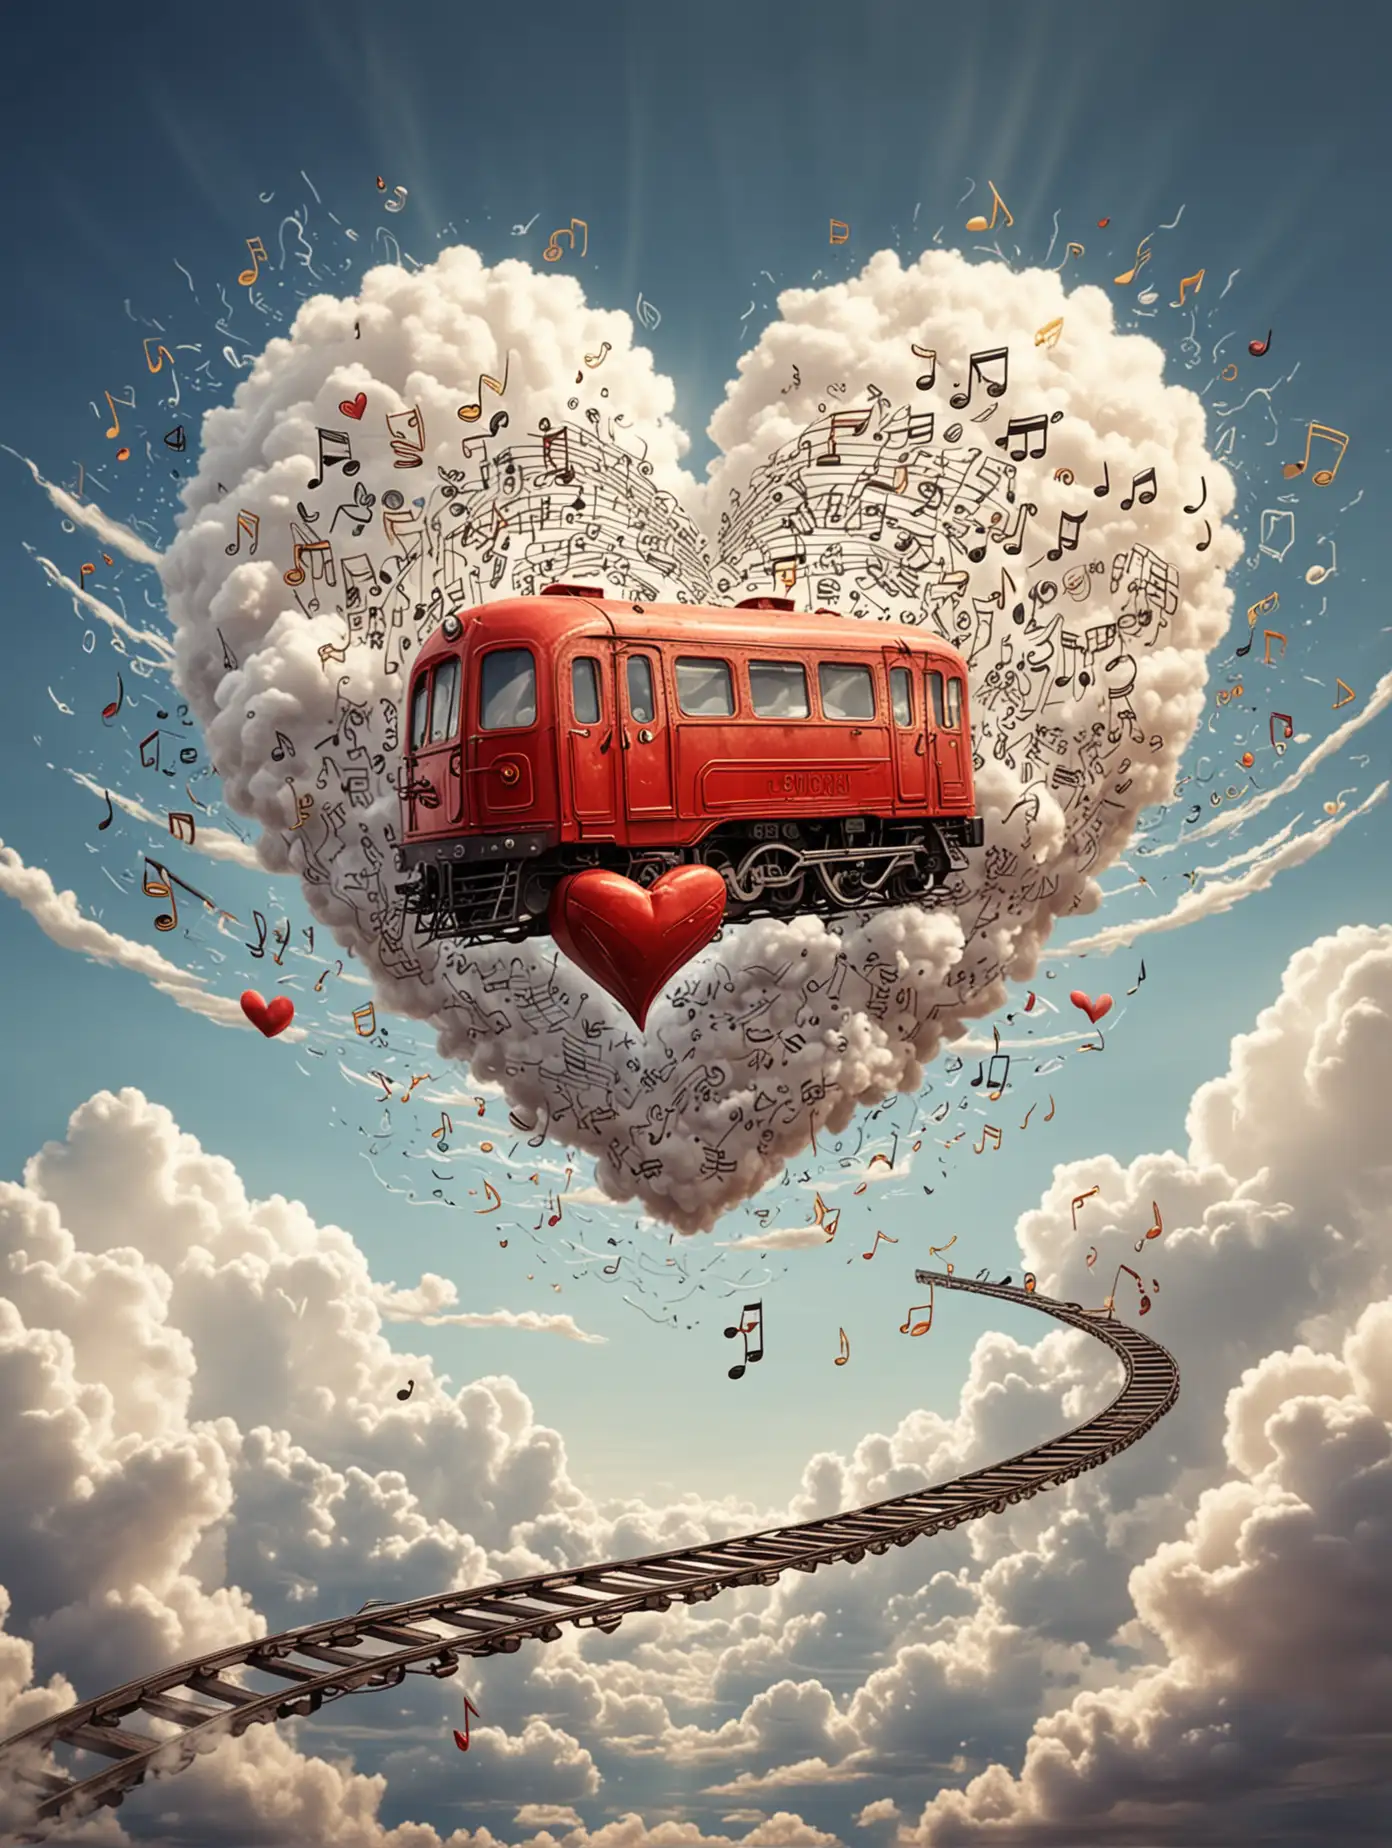 HeartShaped Train with Musical Notes in Clouds